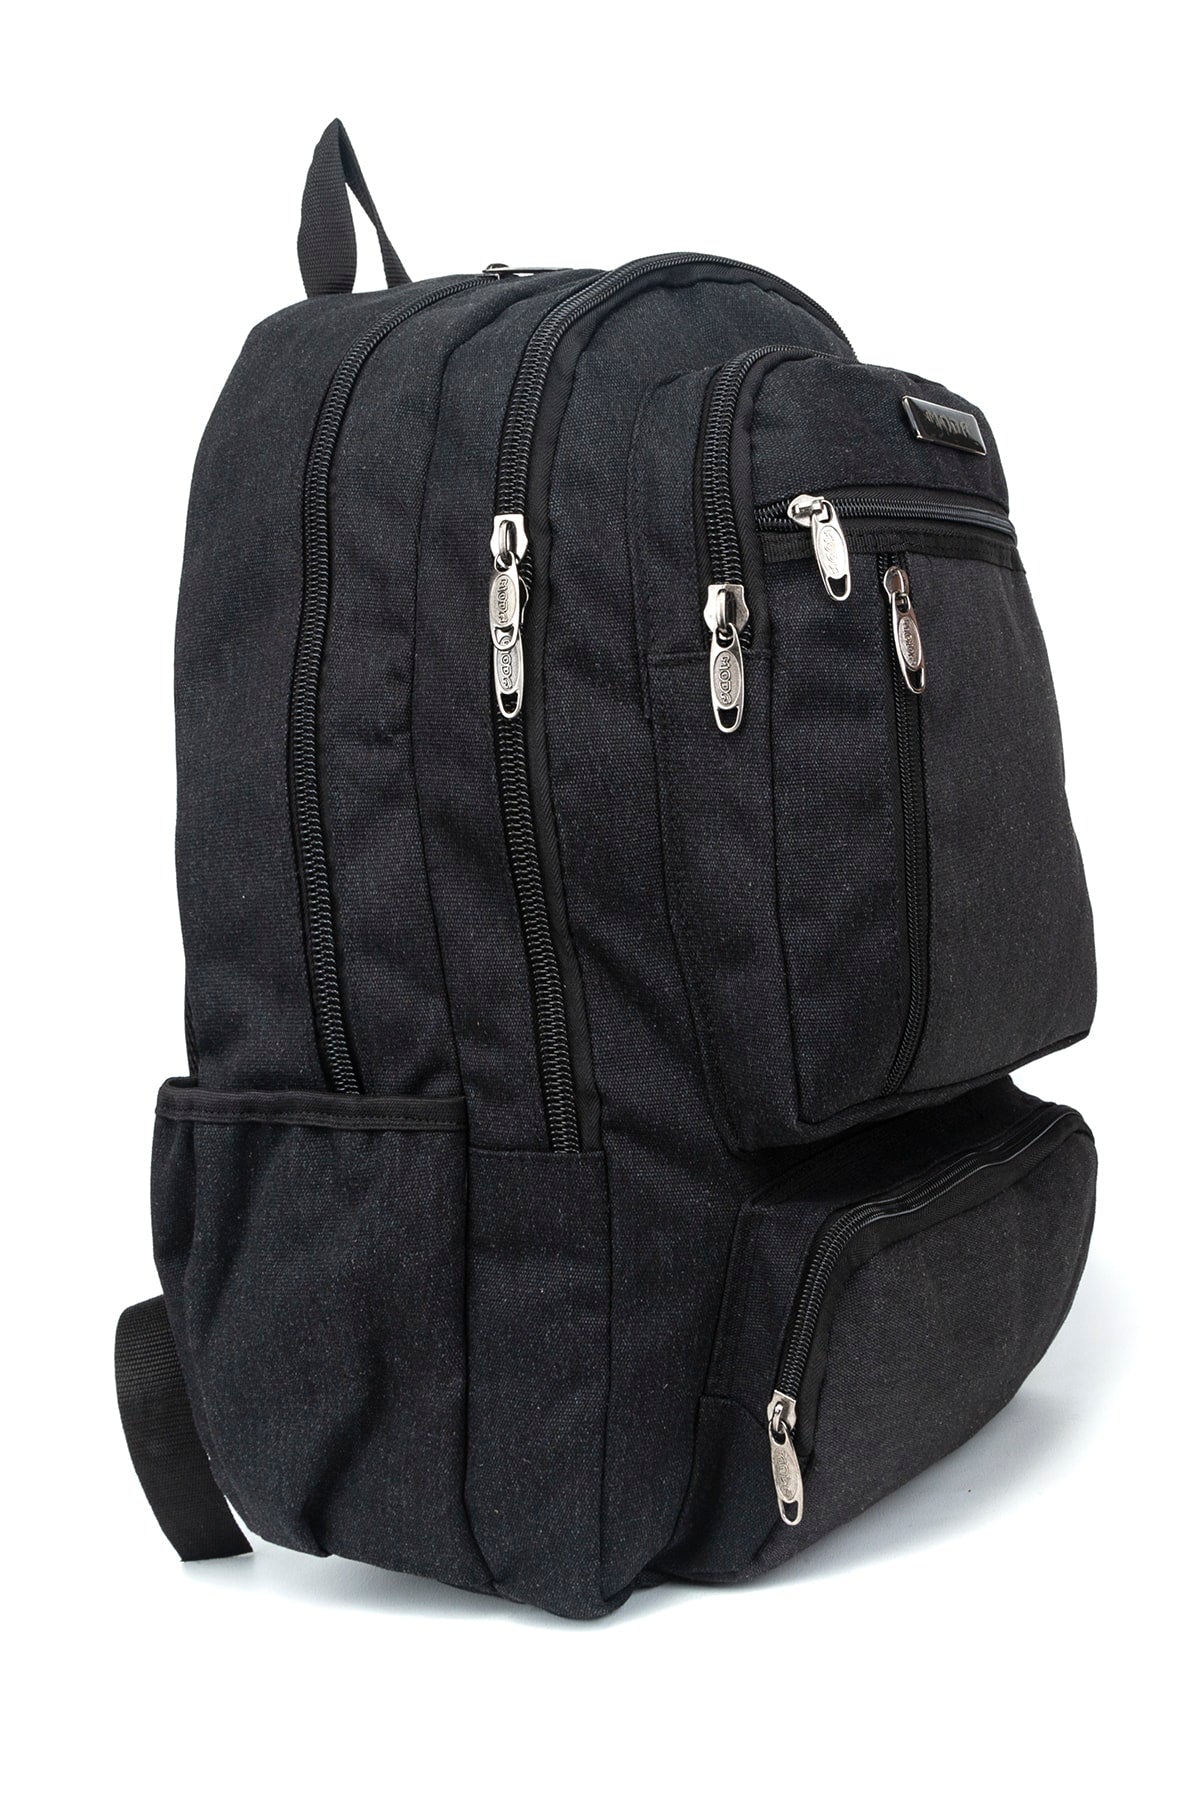 17 Inch Multi-Compartment Canvas Daily & Mountaineer Backpack with Laptop Compartment